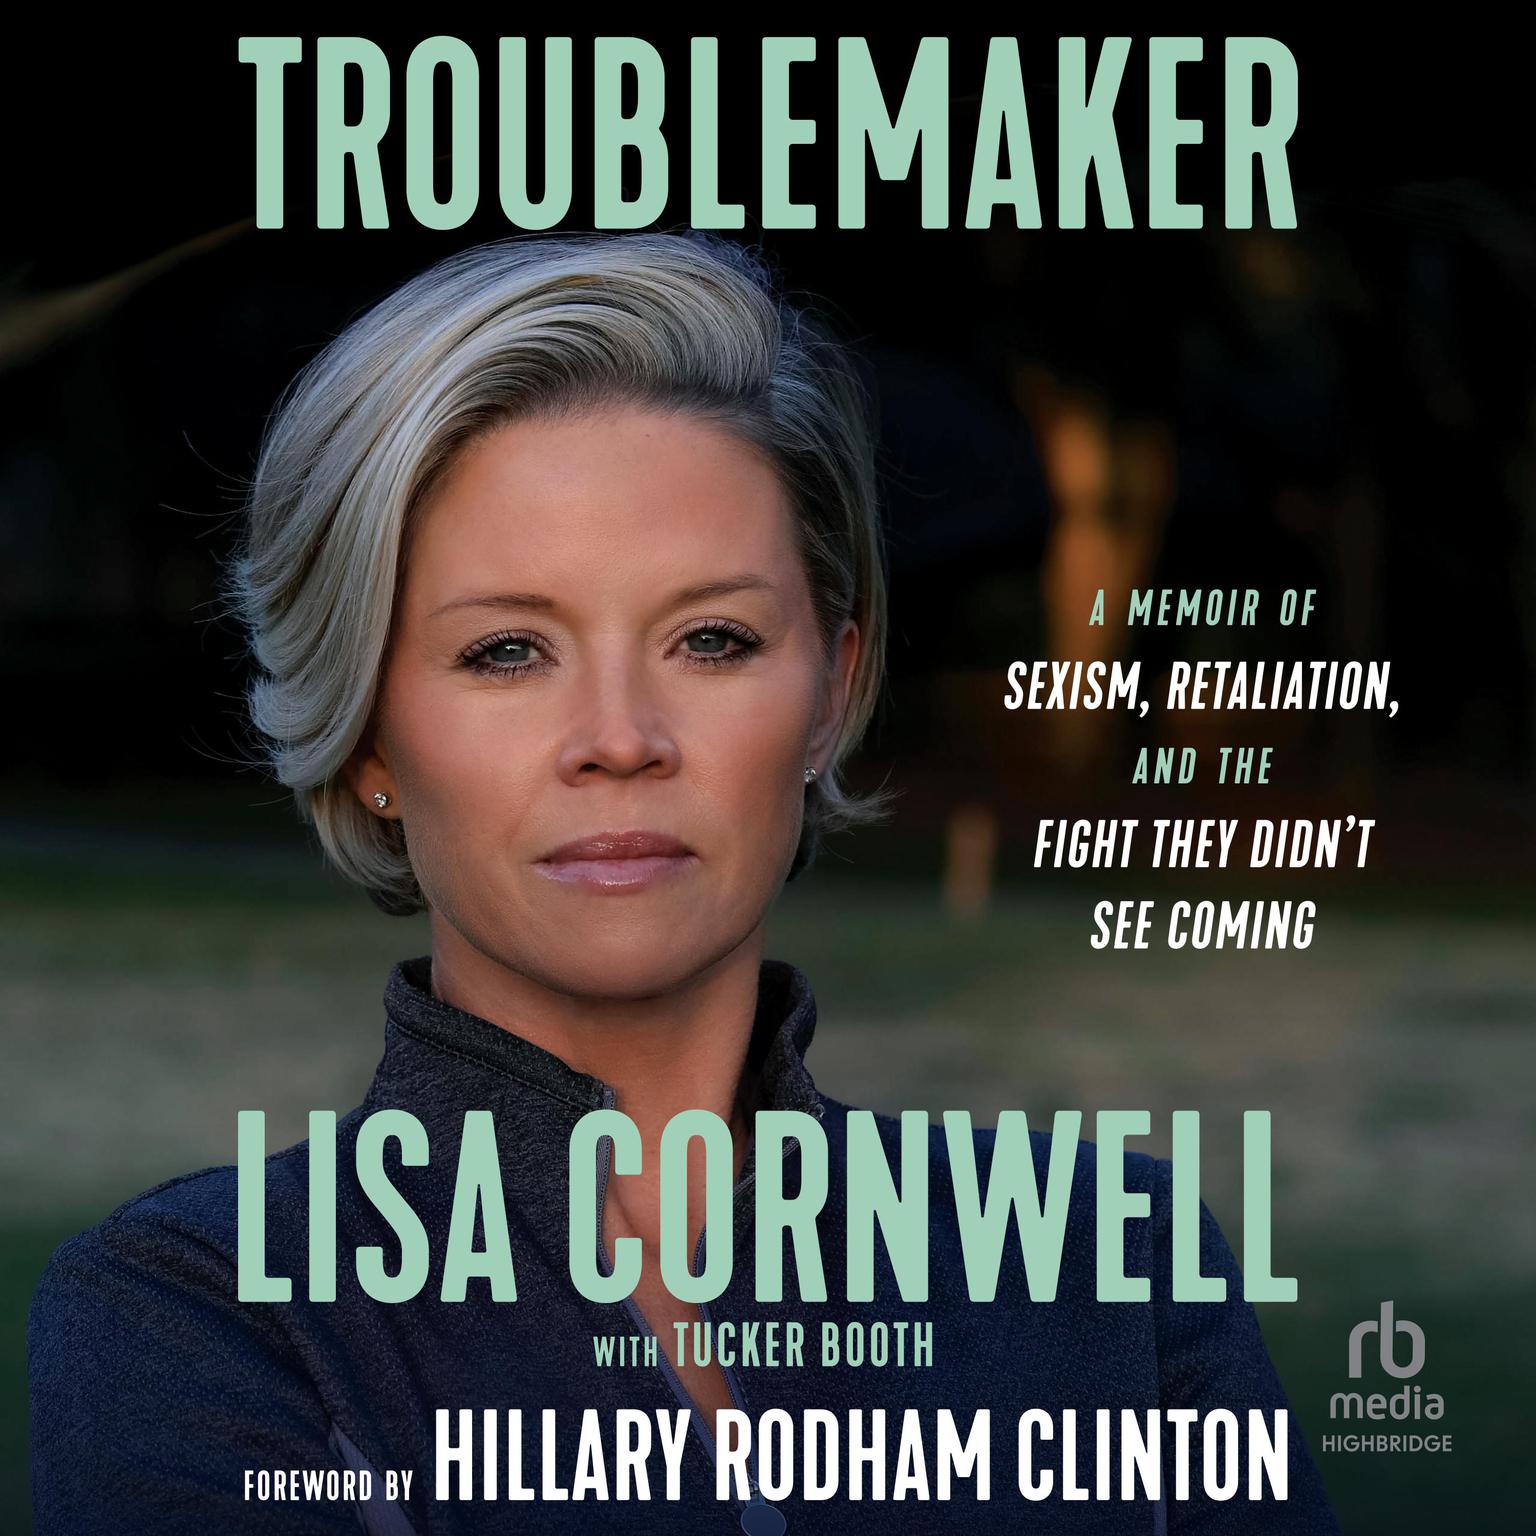 Troublemaker: A Memoir of Sexism, Retaliation, and the Fight They Didnt See Coming Audiobook, by Lisa Cornwell